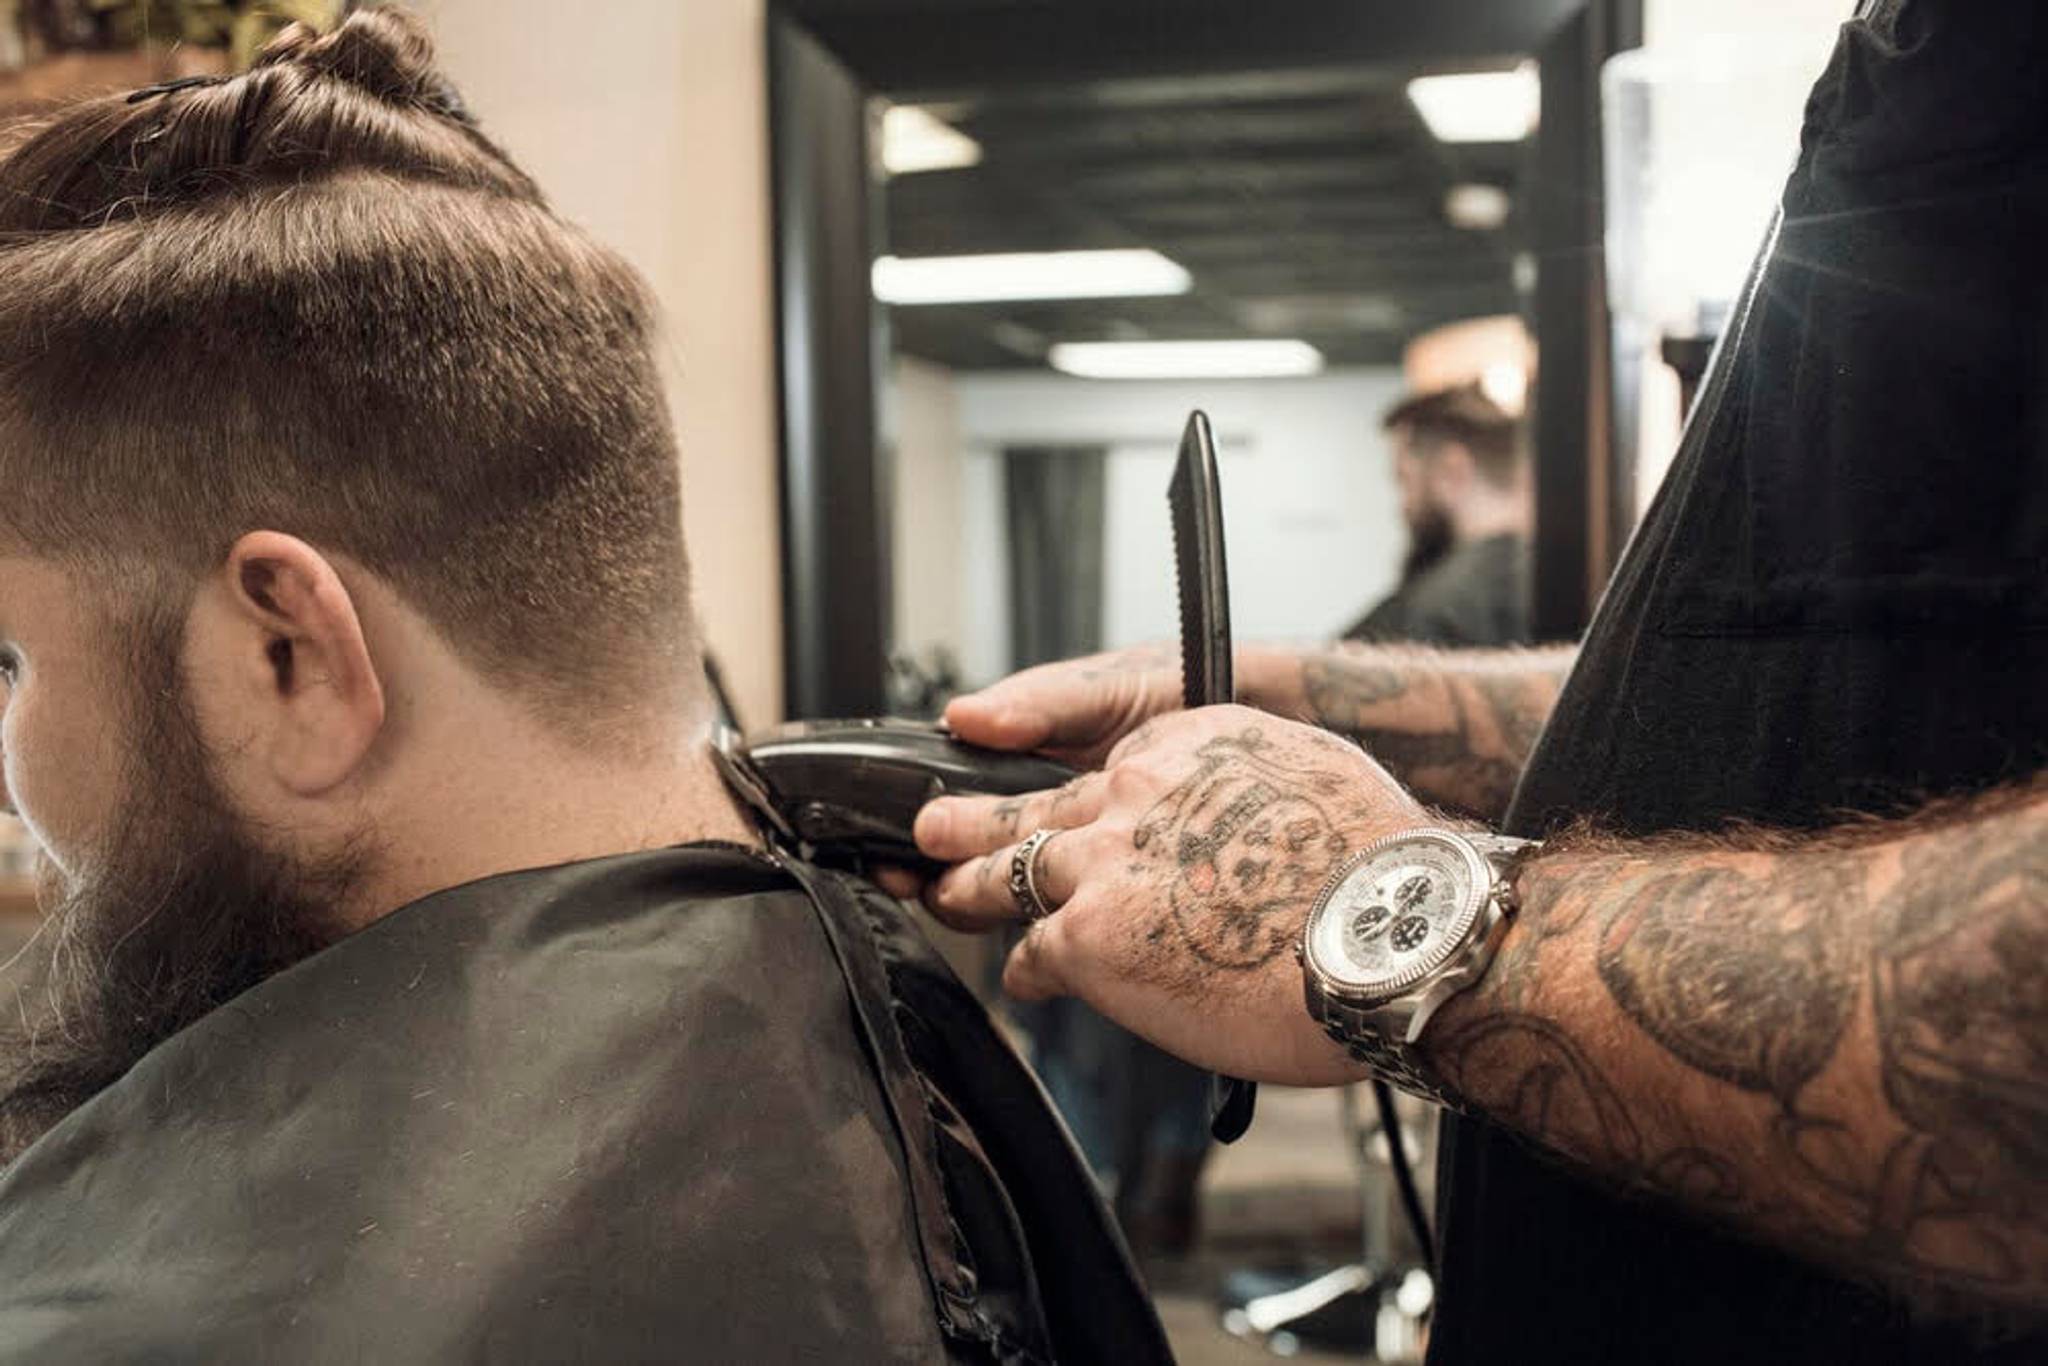 Virtual barber makes quality trims accessible in lockdown